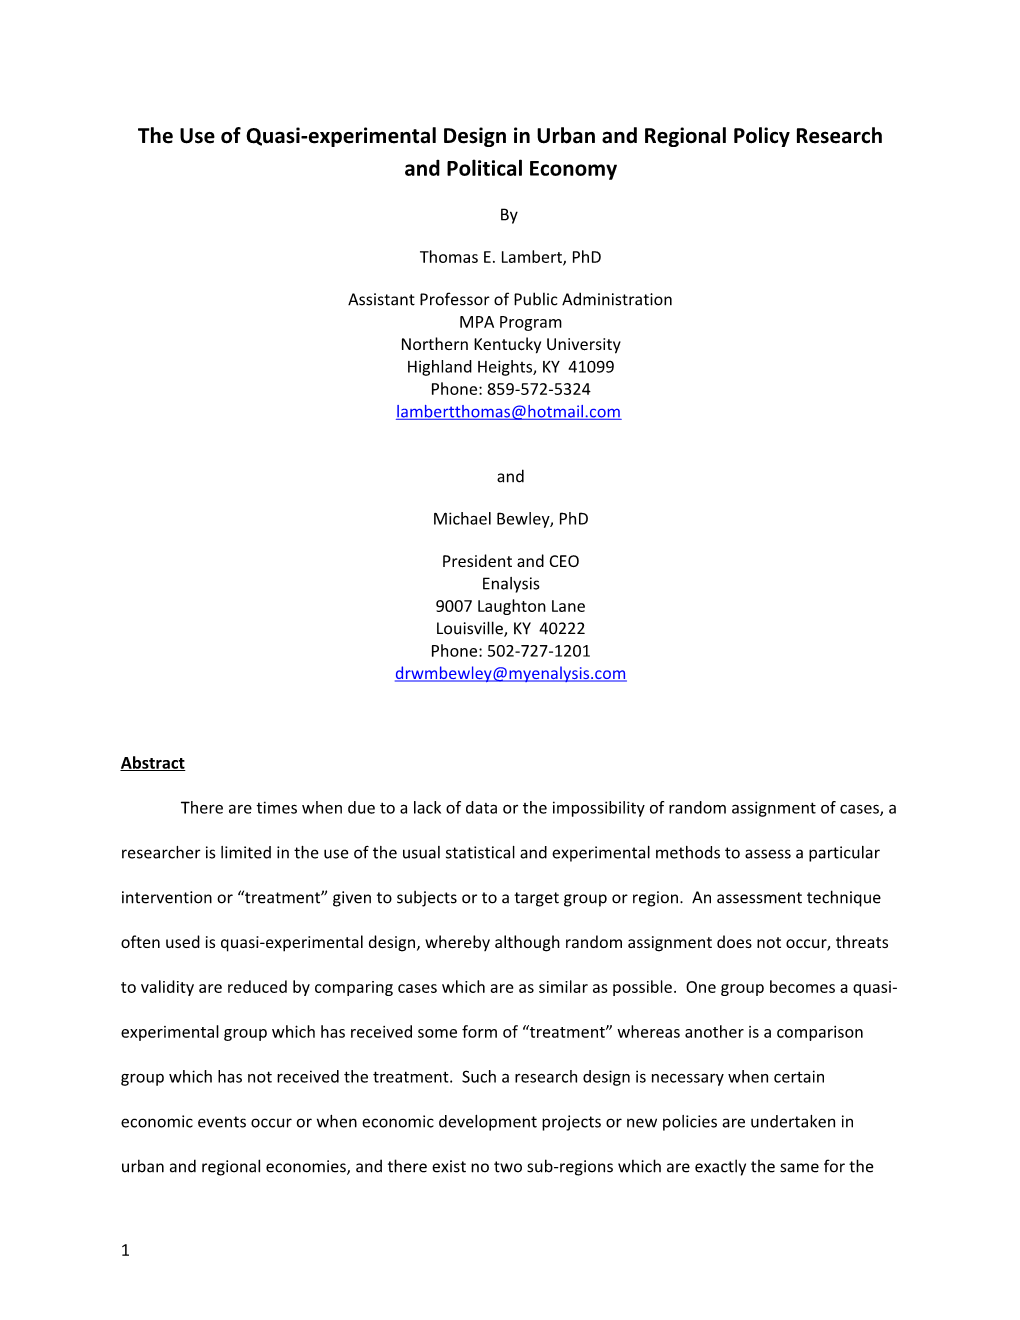 The Use of Quasi-Experimental Design in Urban and Regional Policy Research and Political